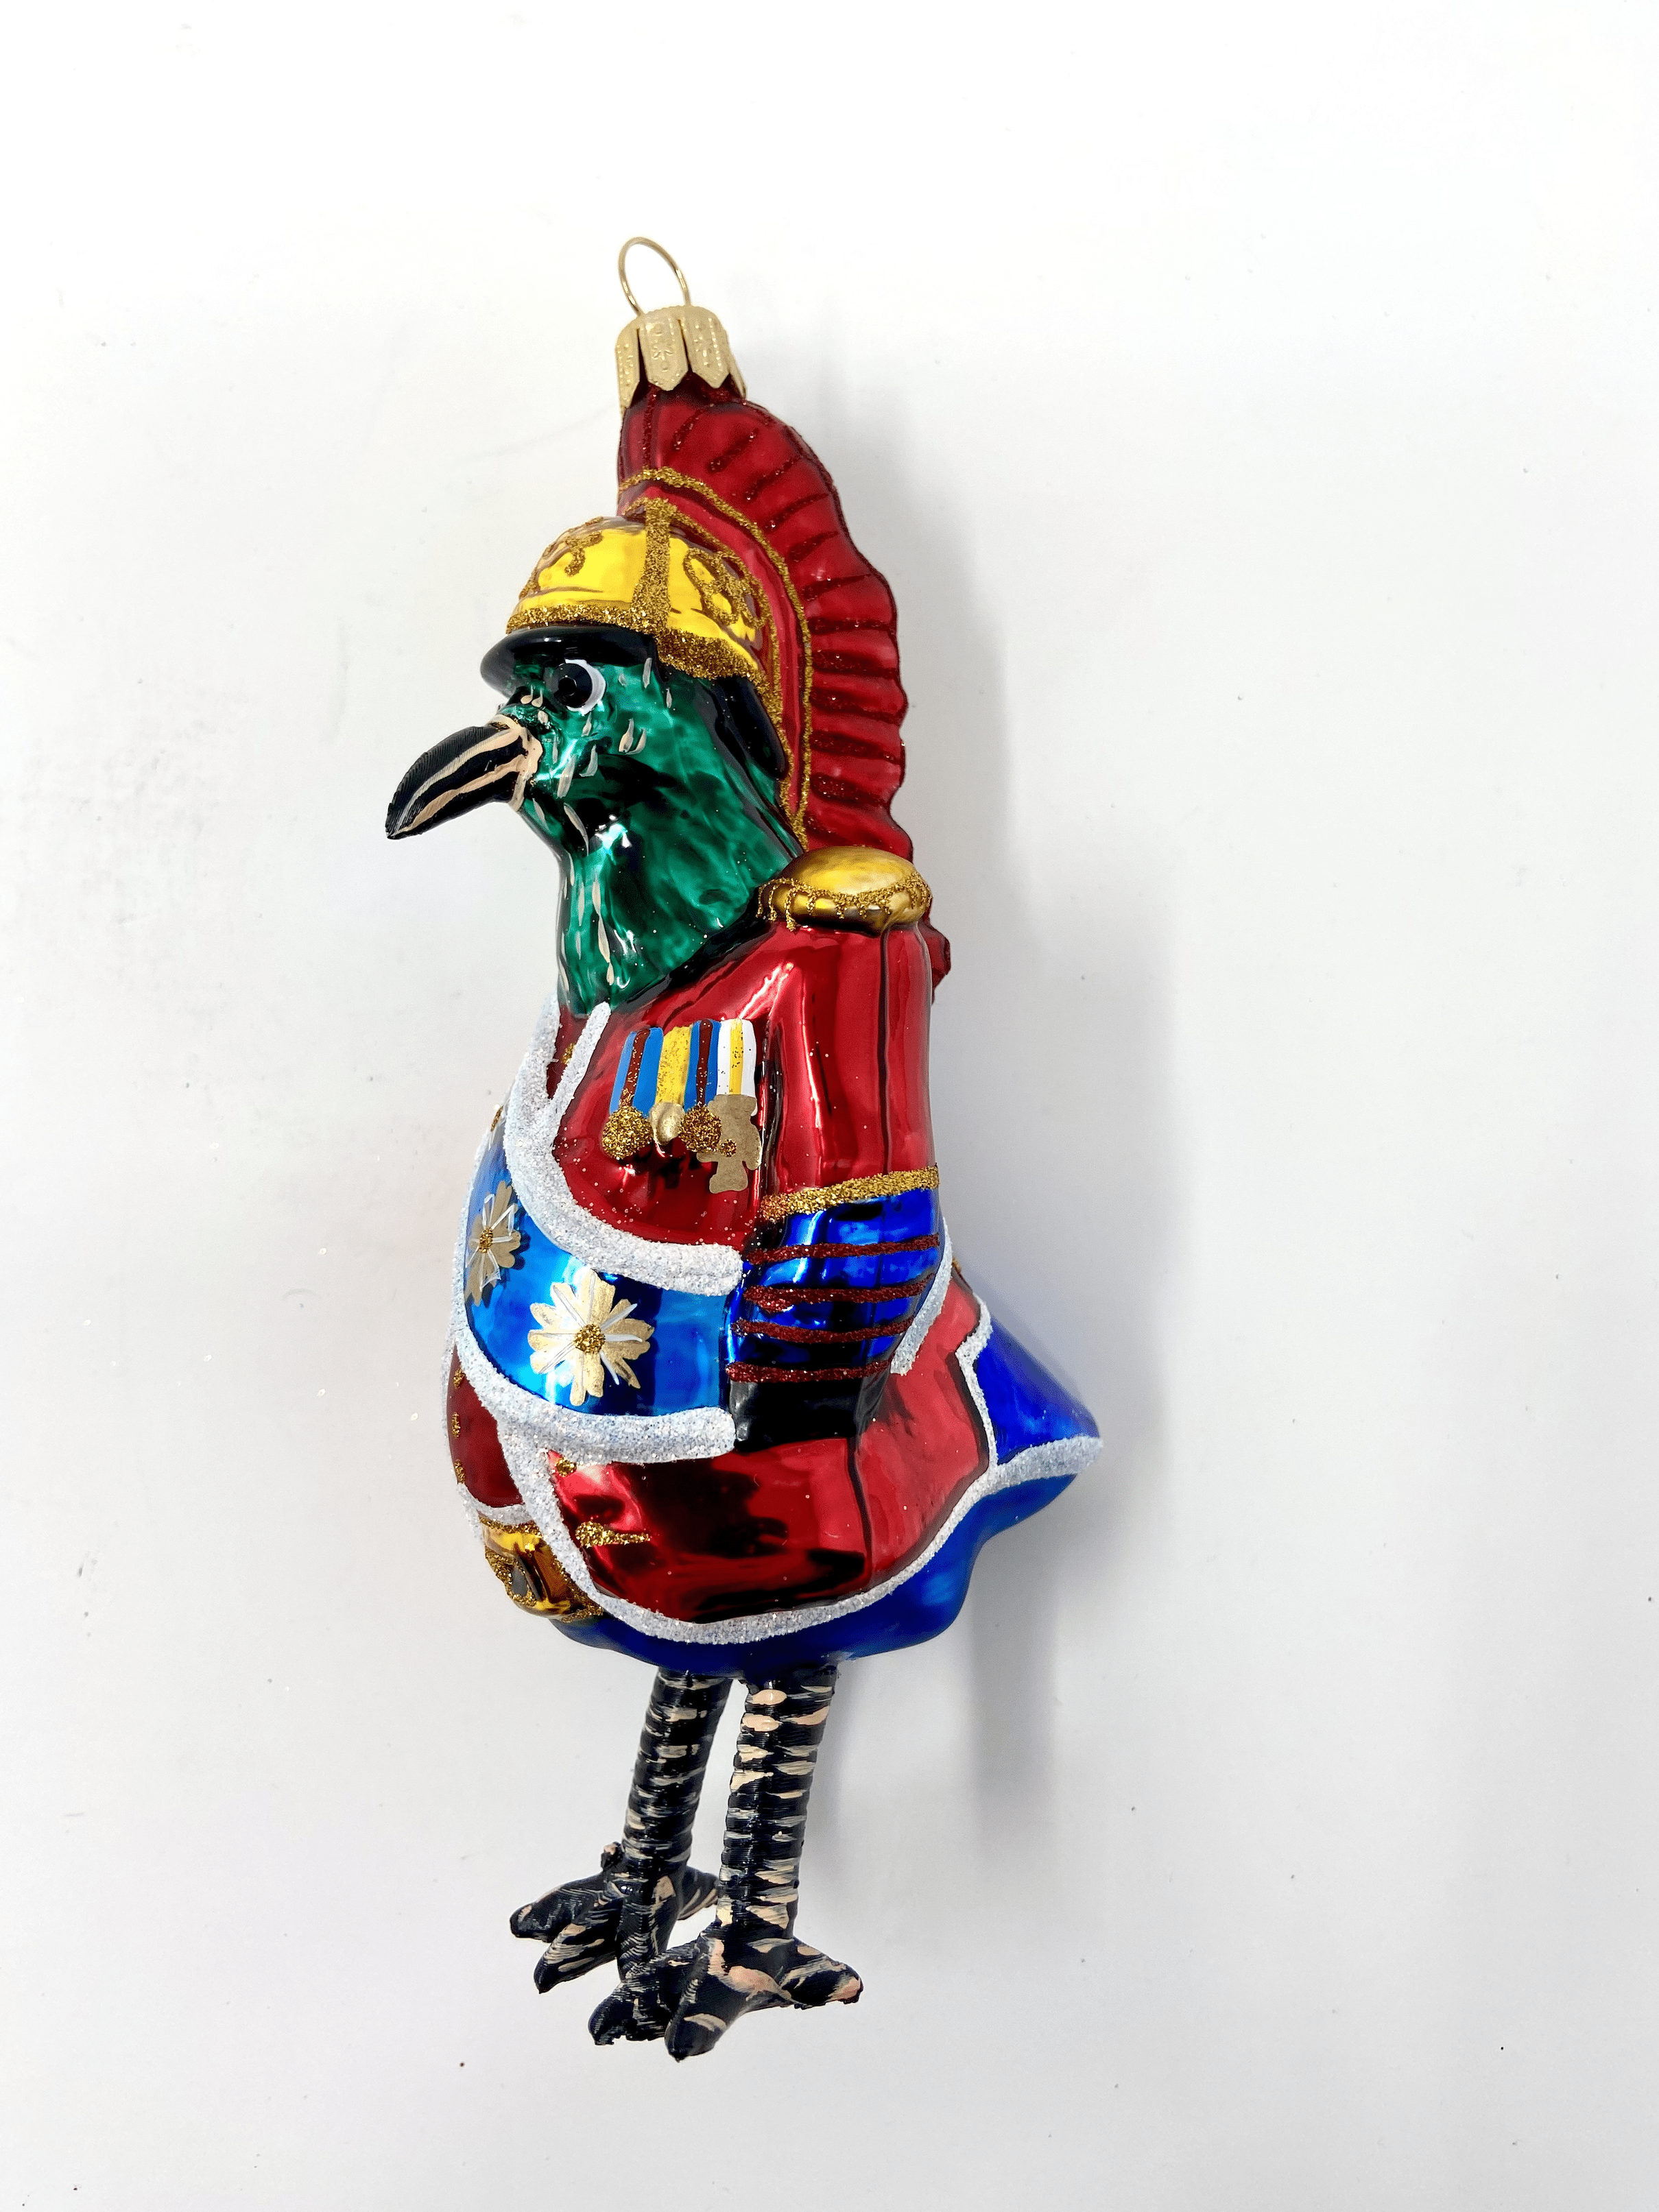 Blue bird dressed in a Buckingham Palace royal outfit with a blue sash and red coat. Polish glass christmas ornaments in saturated colors.